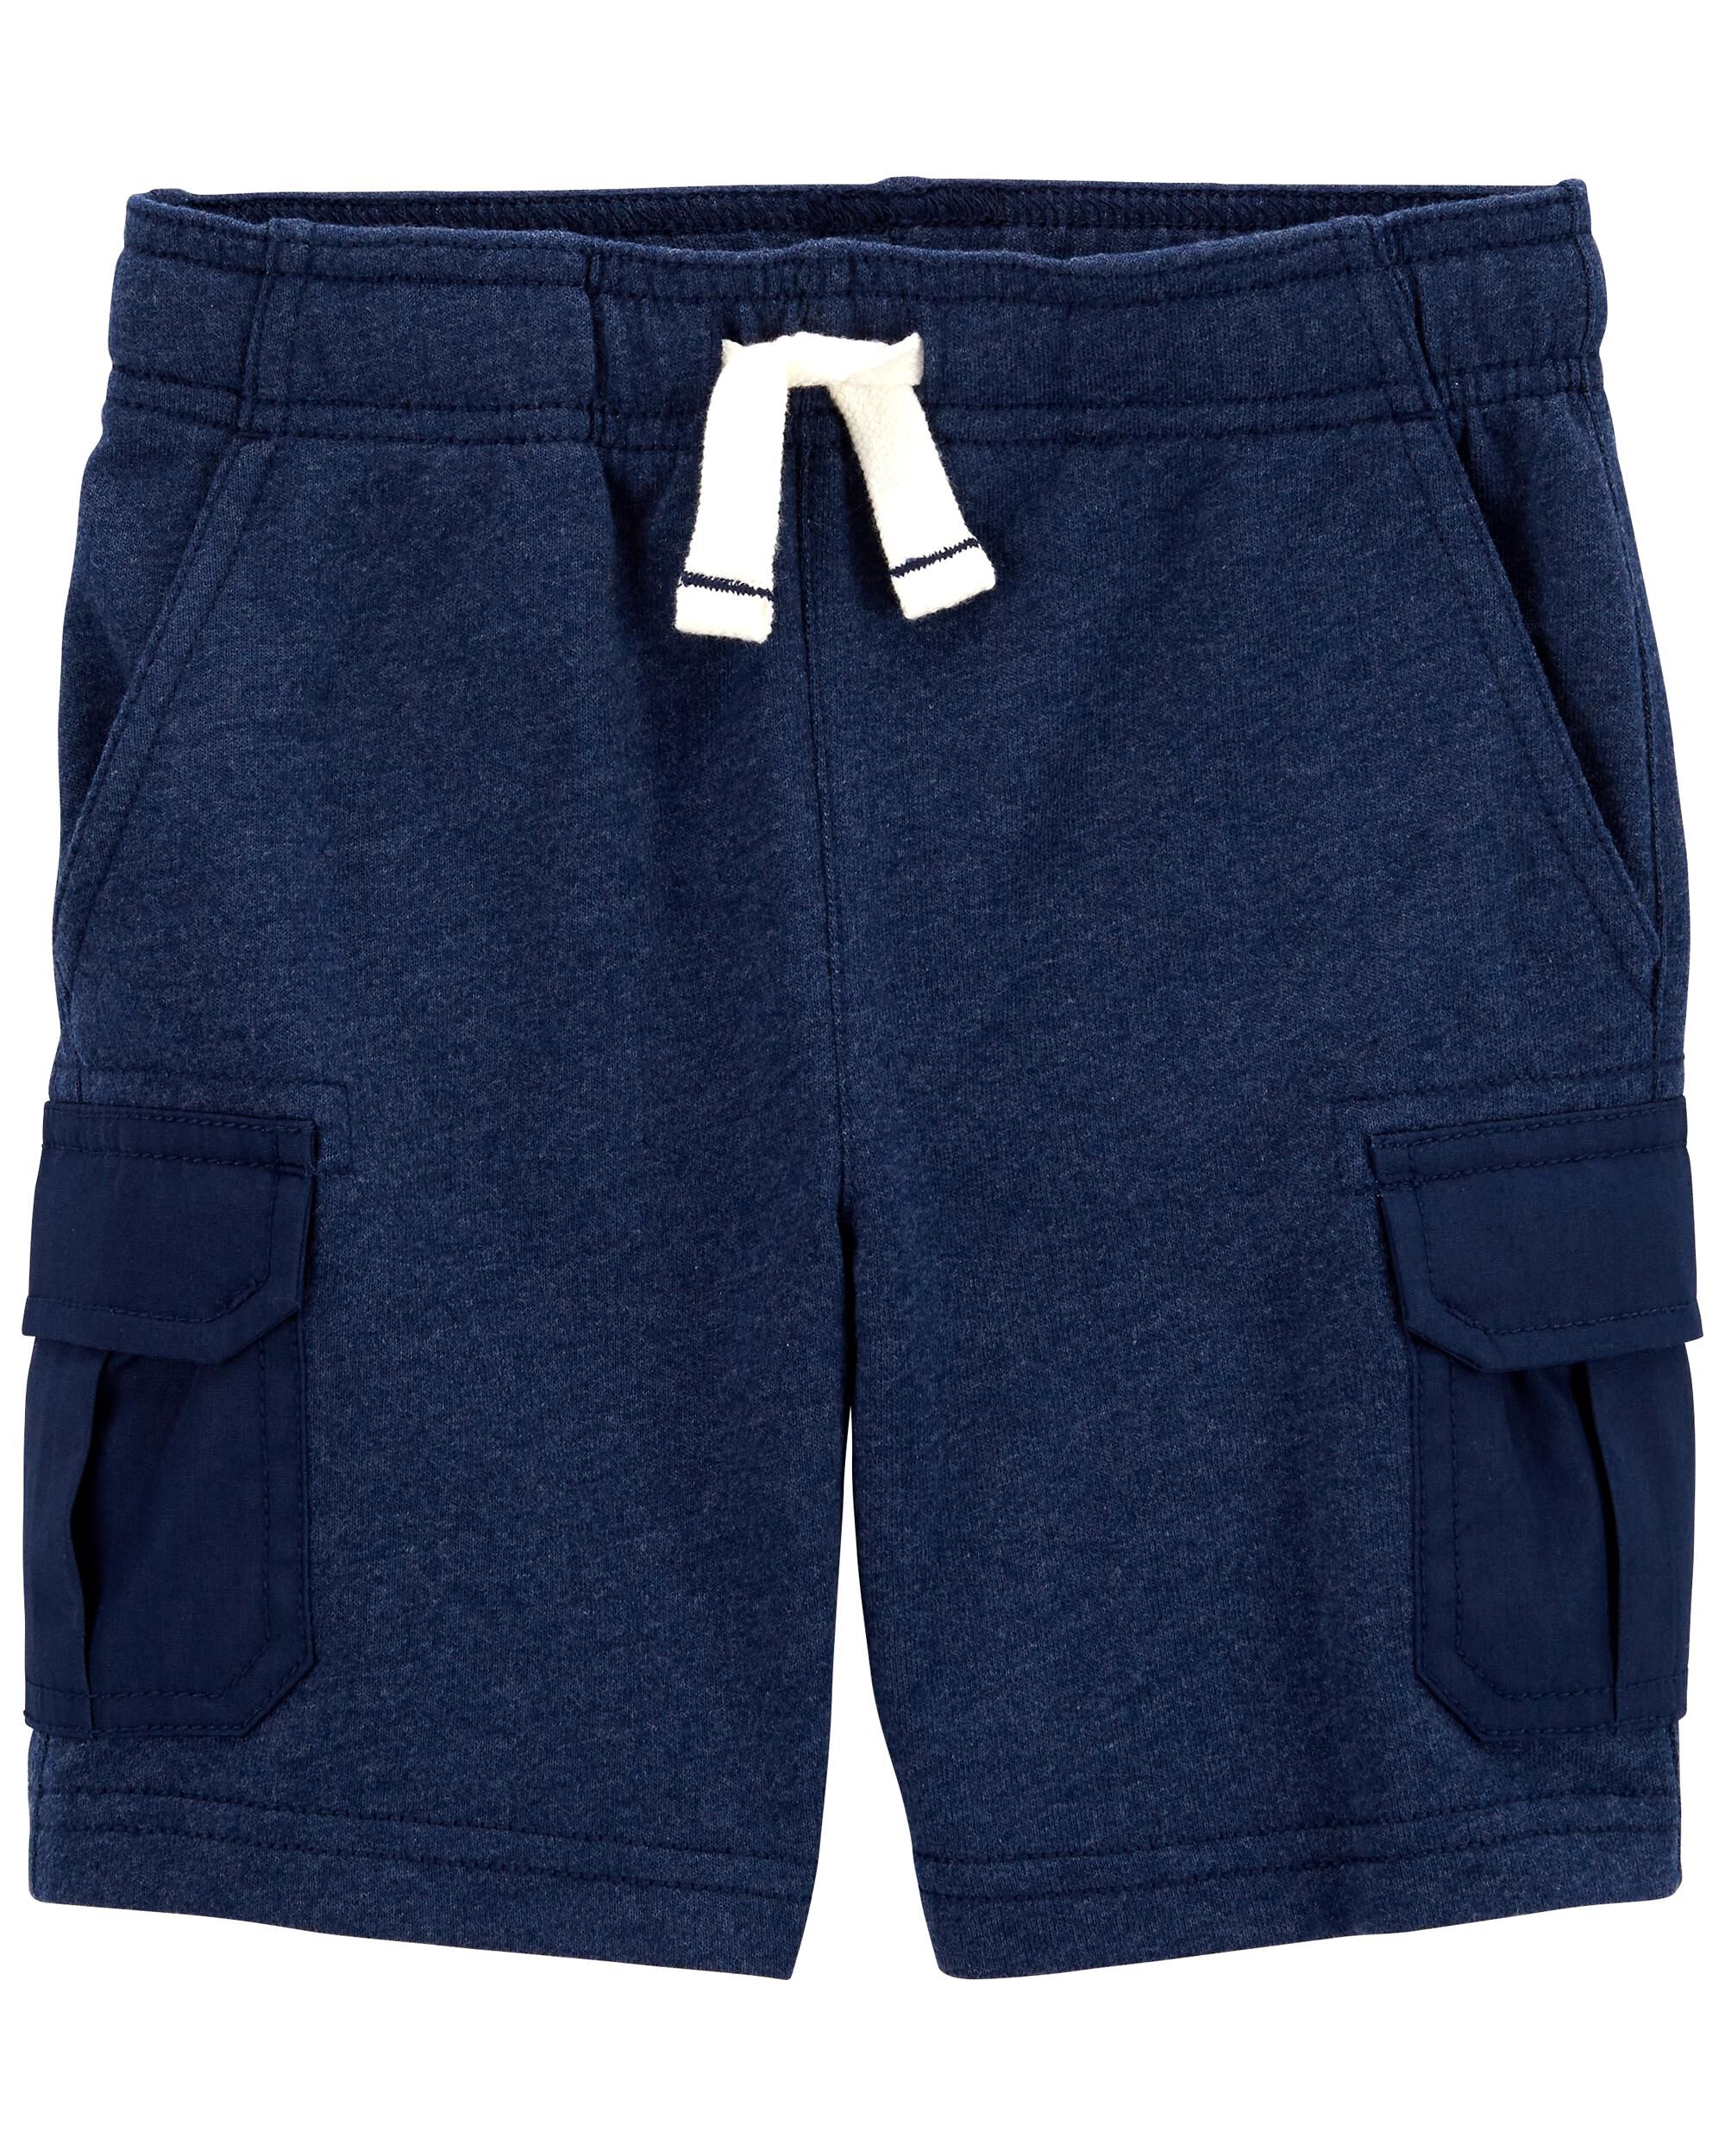 Simple Joys By Carter's Toddler Boy's 2-Pack Flat Front Shorts Khaki/Navy 4T 